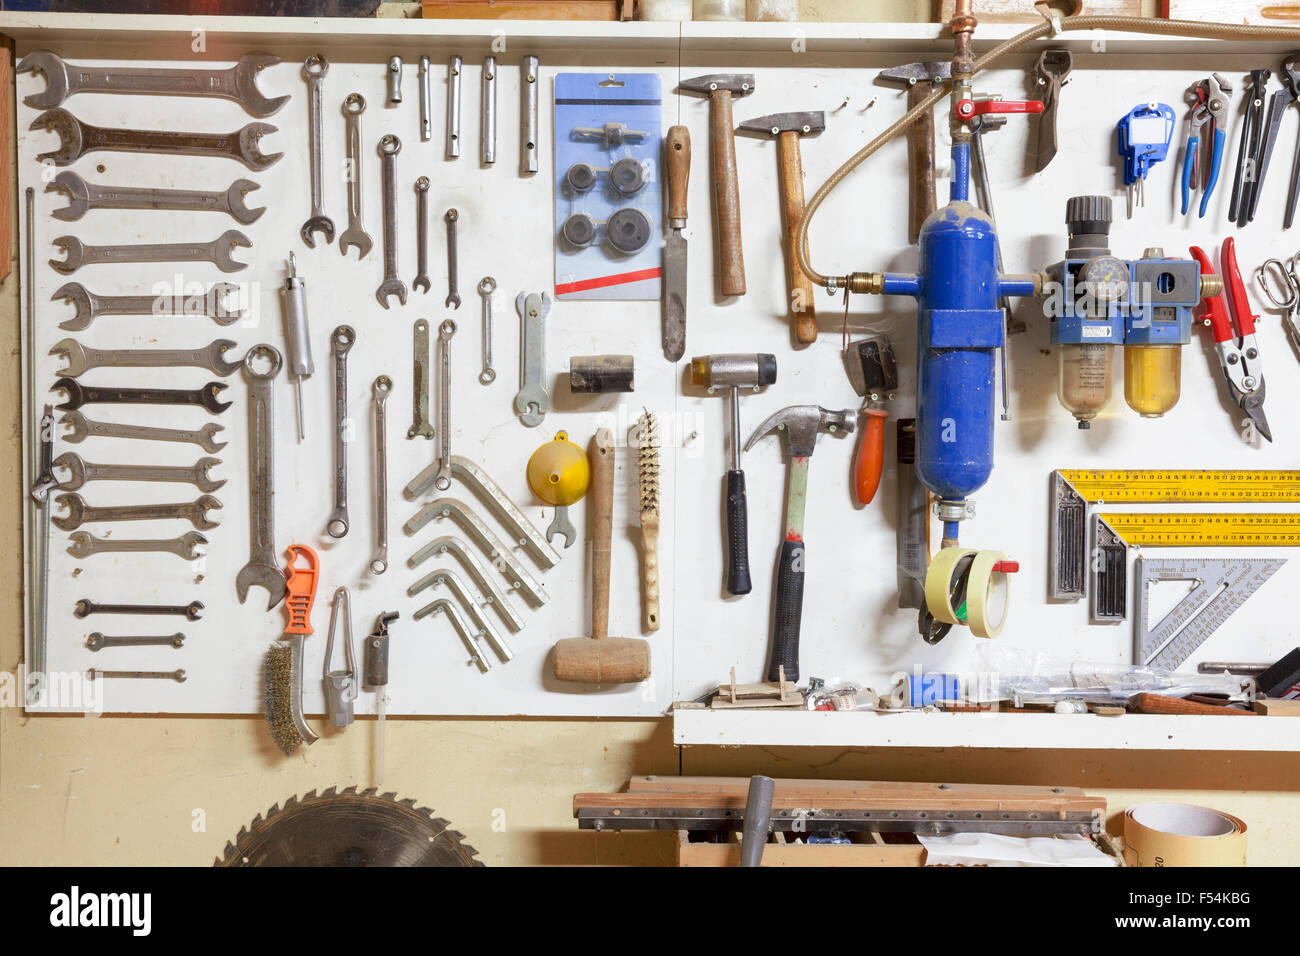 shelf with hand tools for woodworking Stock Photo